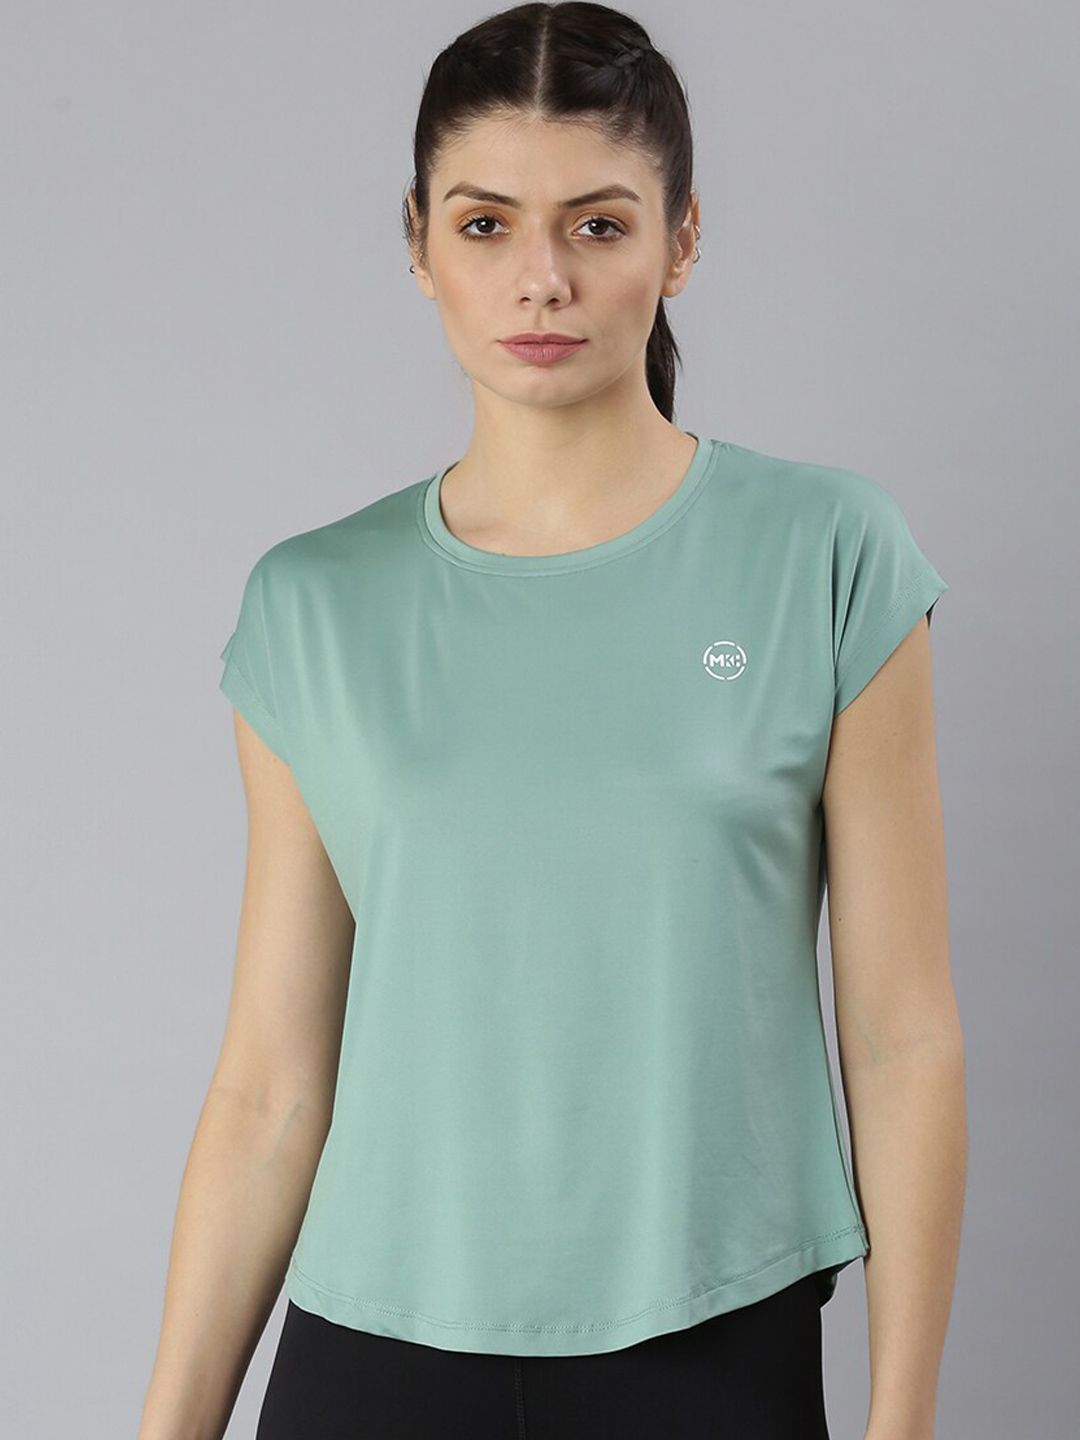 MKH Women Green Extended Sleeves Dri-FIT T-shirt Price in India